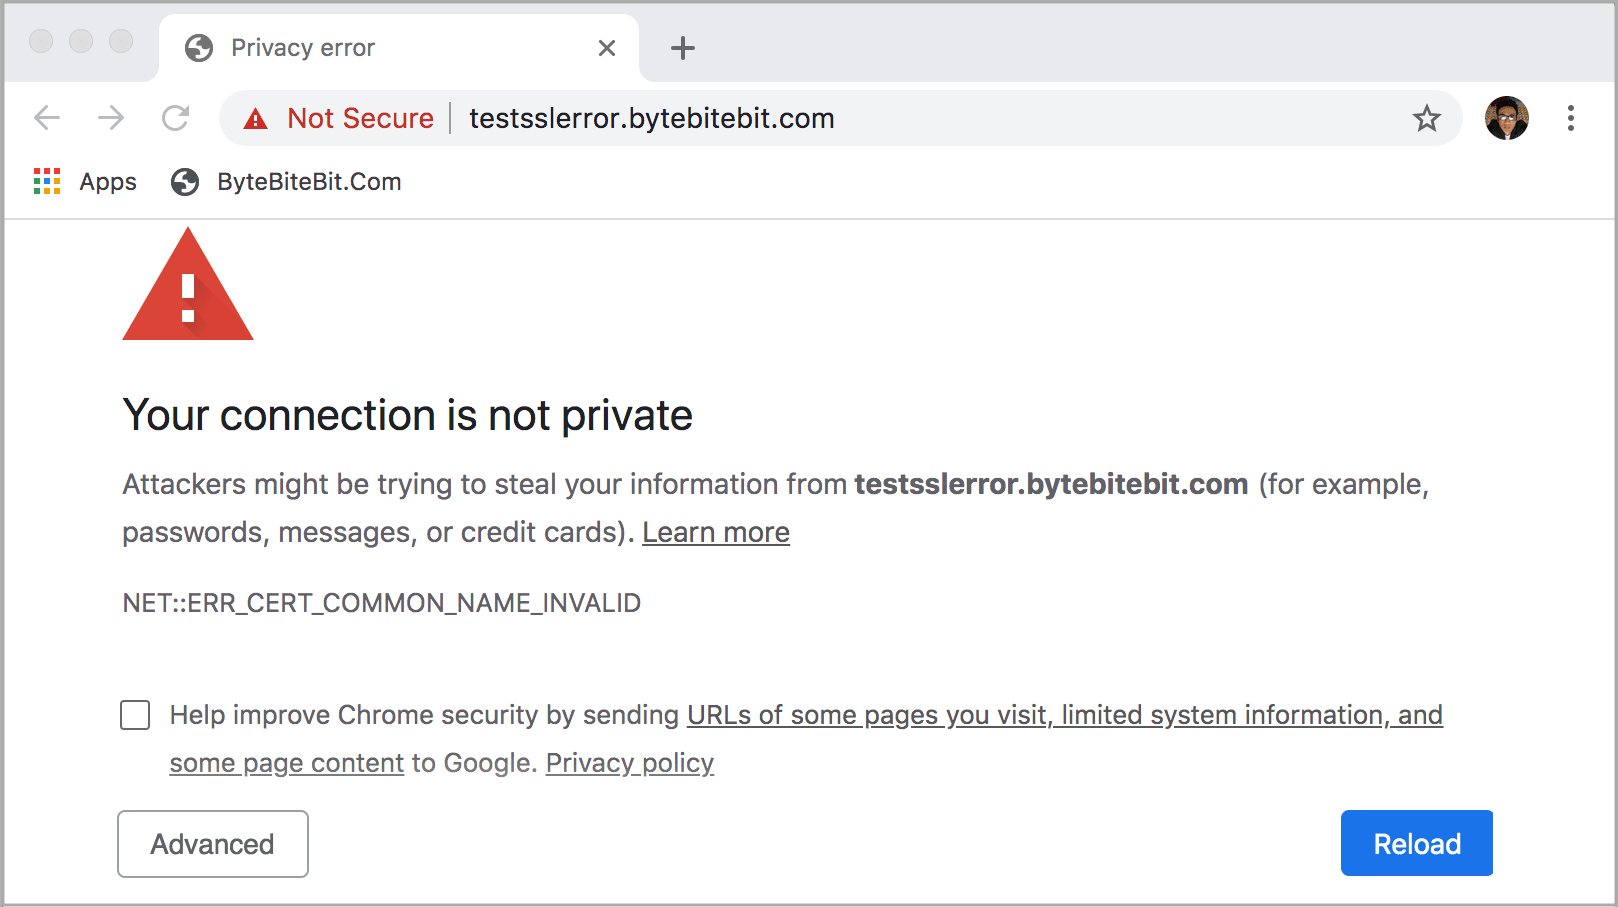 Screen showing privacy error